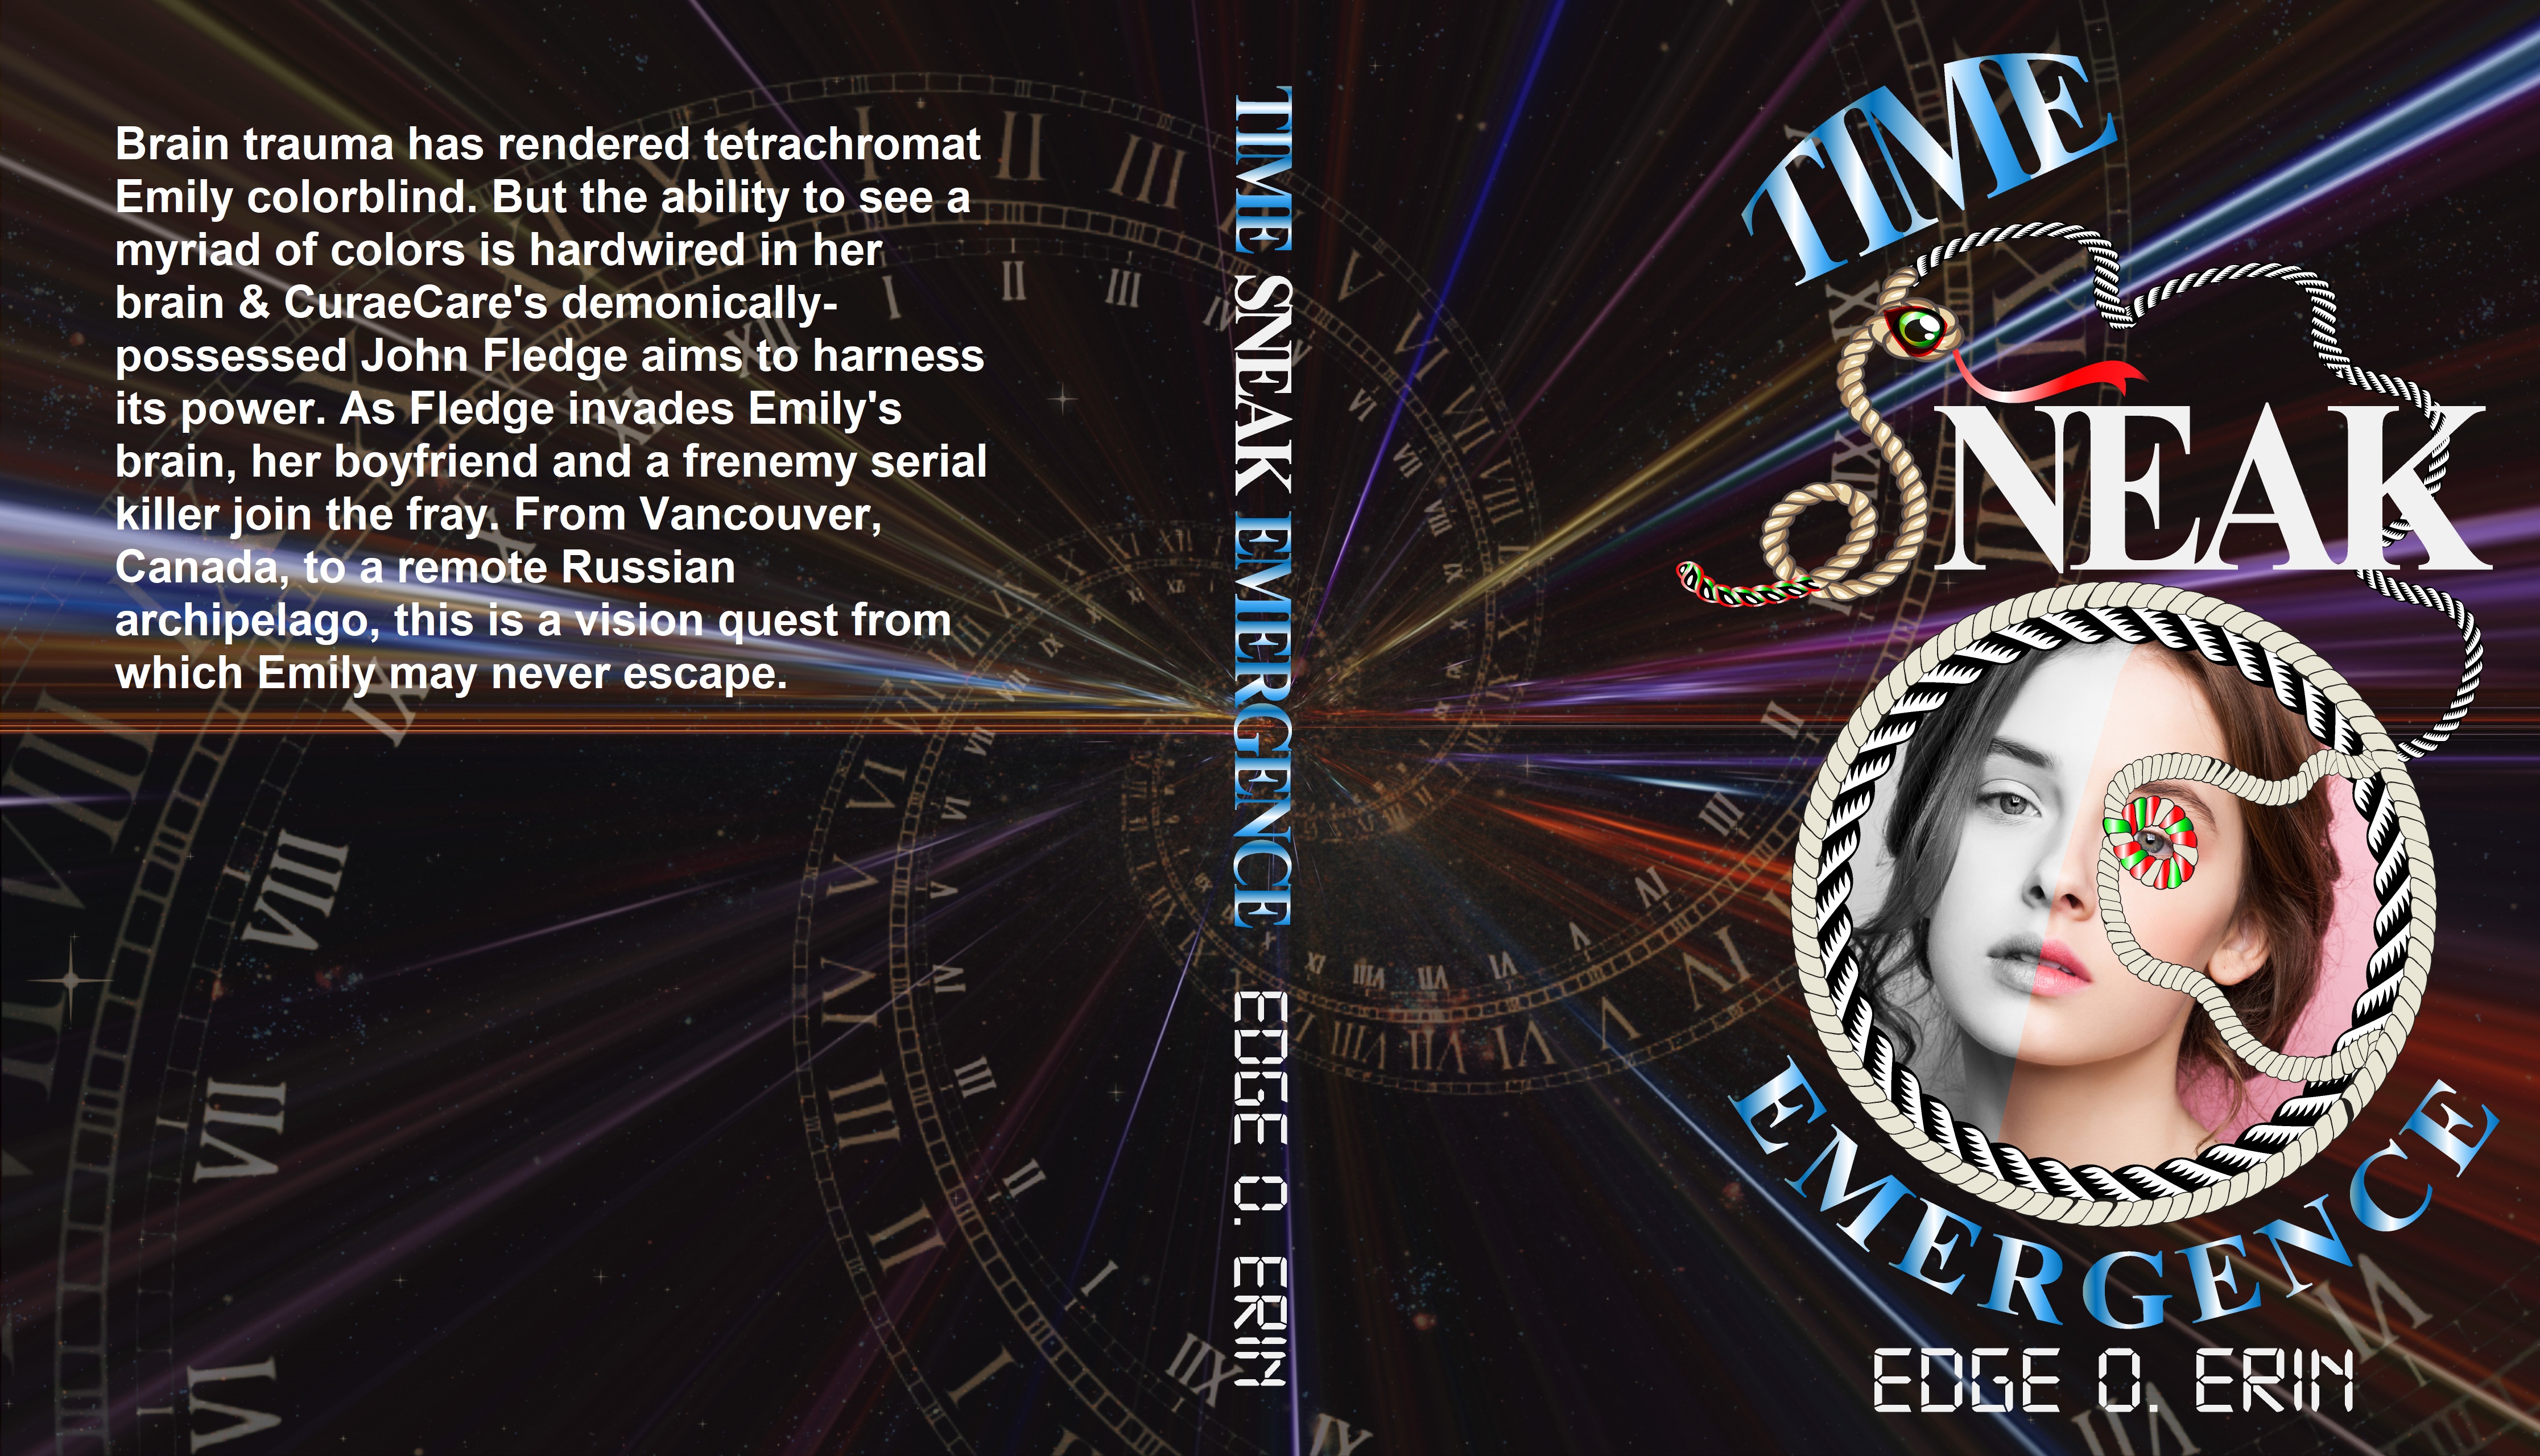 Full cover of the book, Time Sneak: Emergence which is like The X-Files meets The Fringe